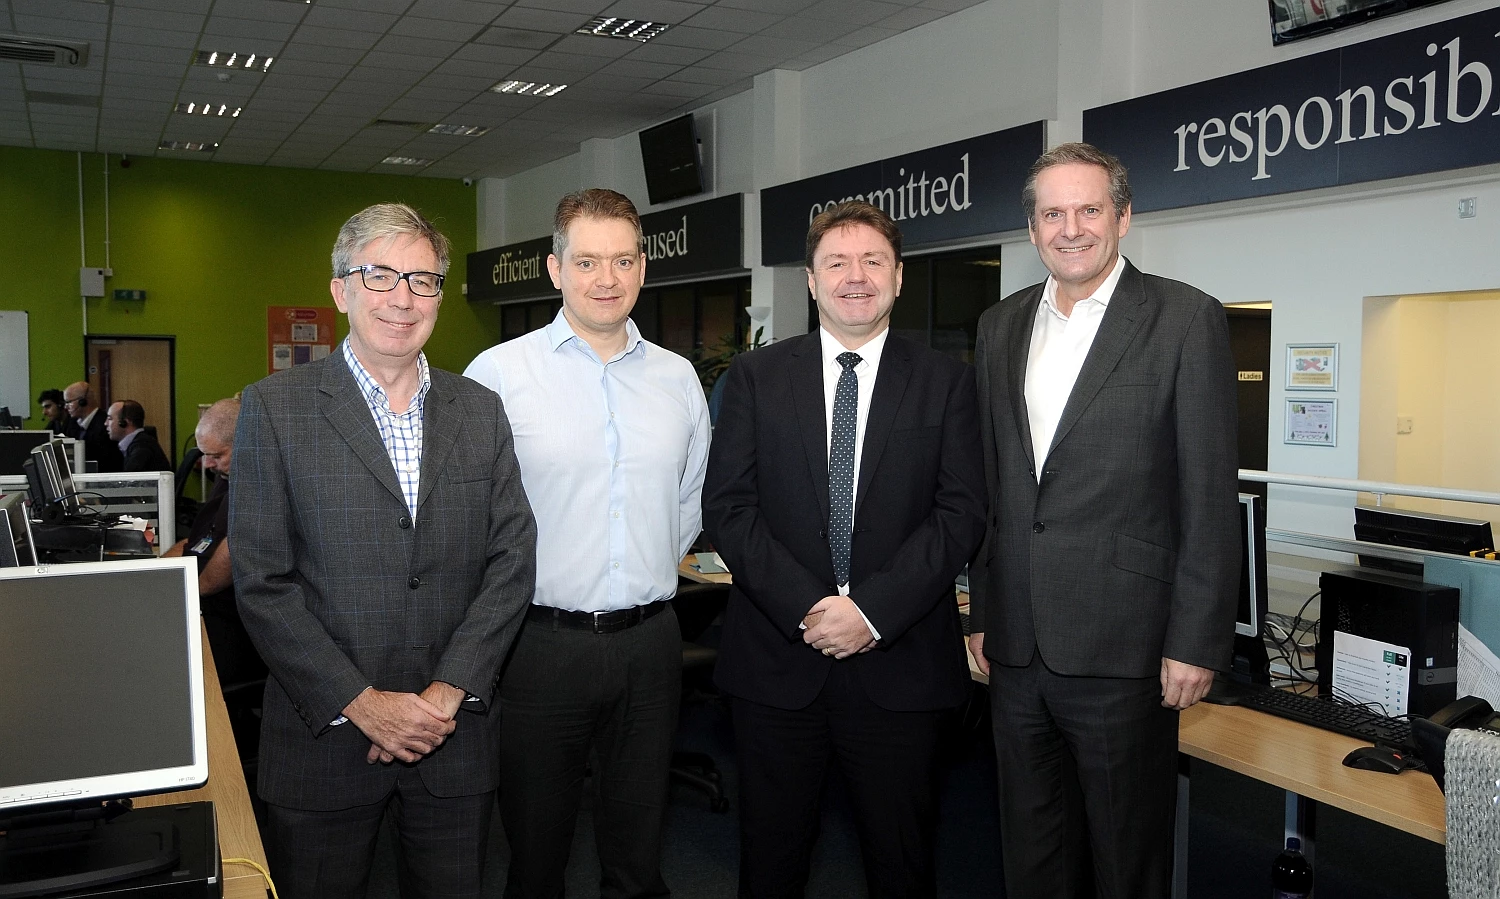 Mark Wilcockson, Senior Management, British Business Bank; Richard Wilson, Management Accountant, ANT Marketing; Tim Daniels, Investment Manager, Finance For Enterprise; Anthony Hinchcliffe, Founder and CEO, ANT Marketing